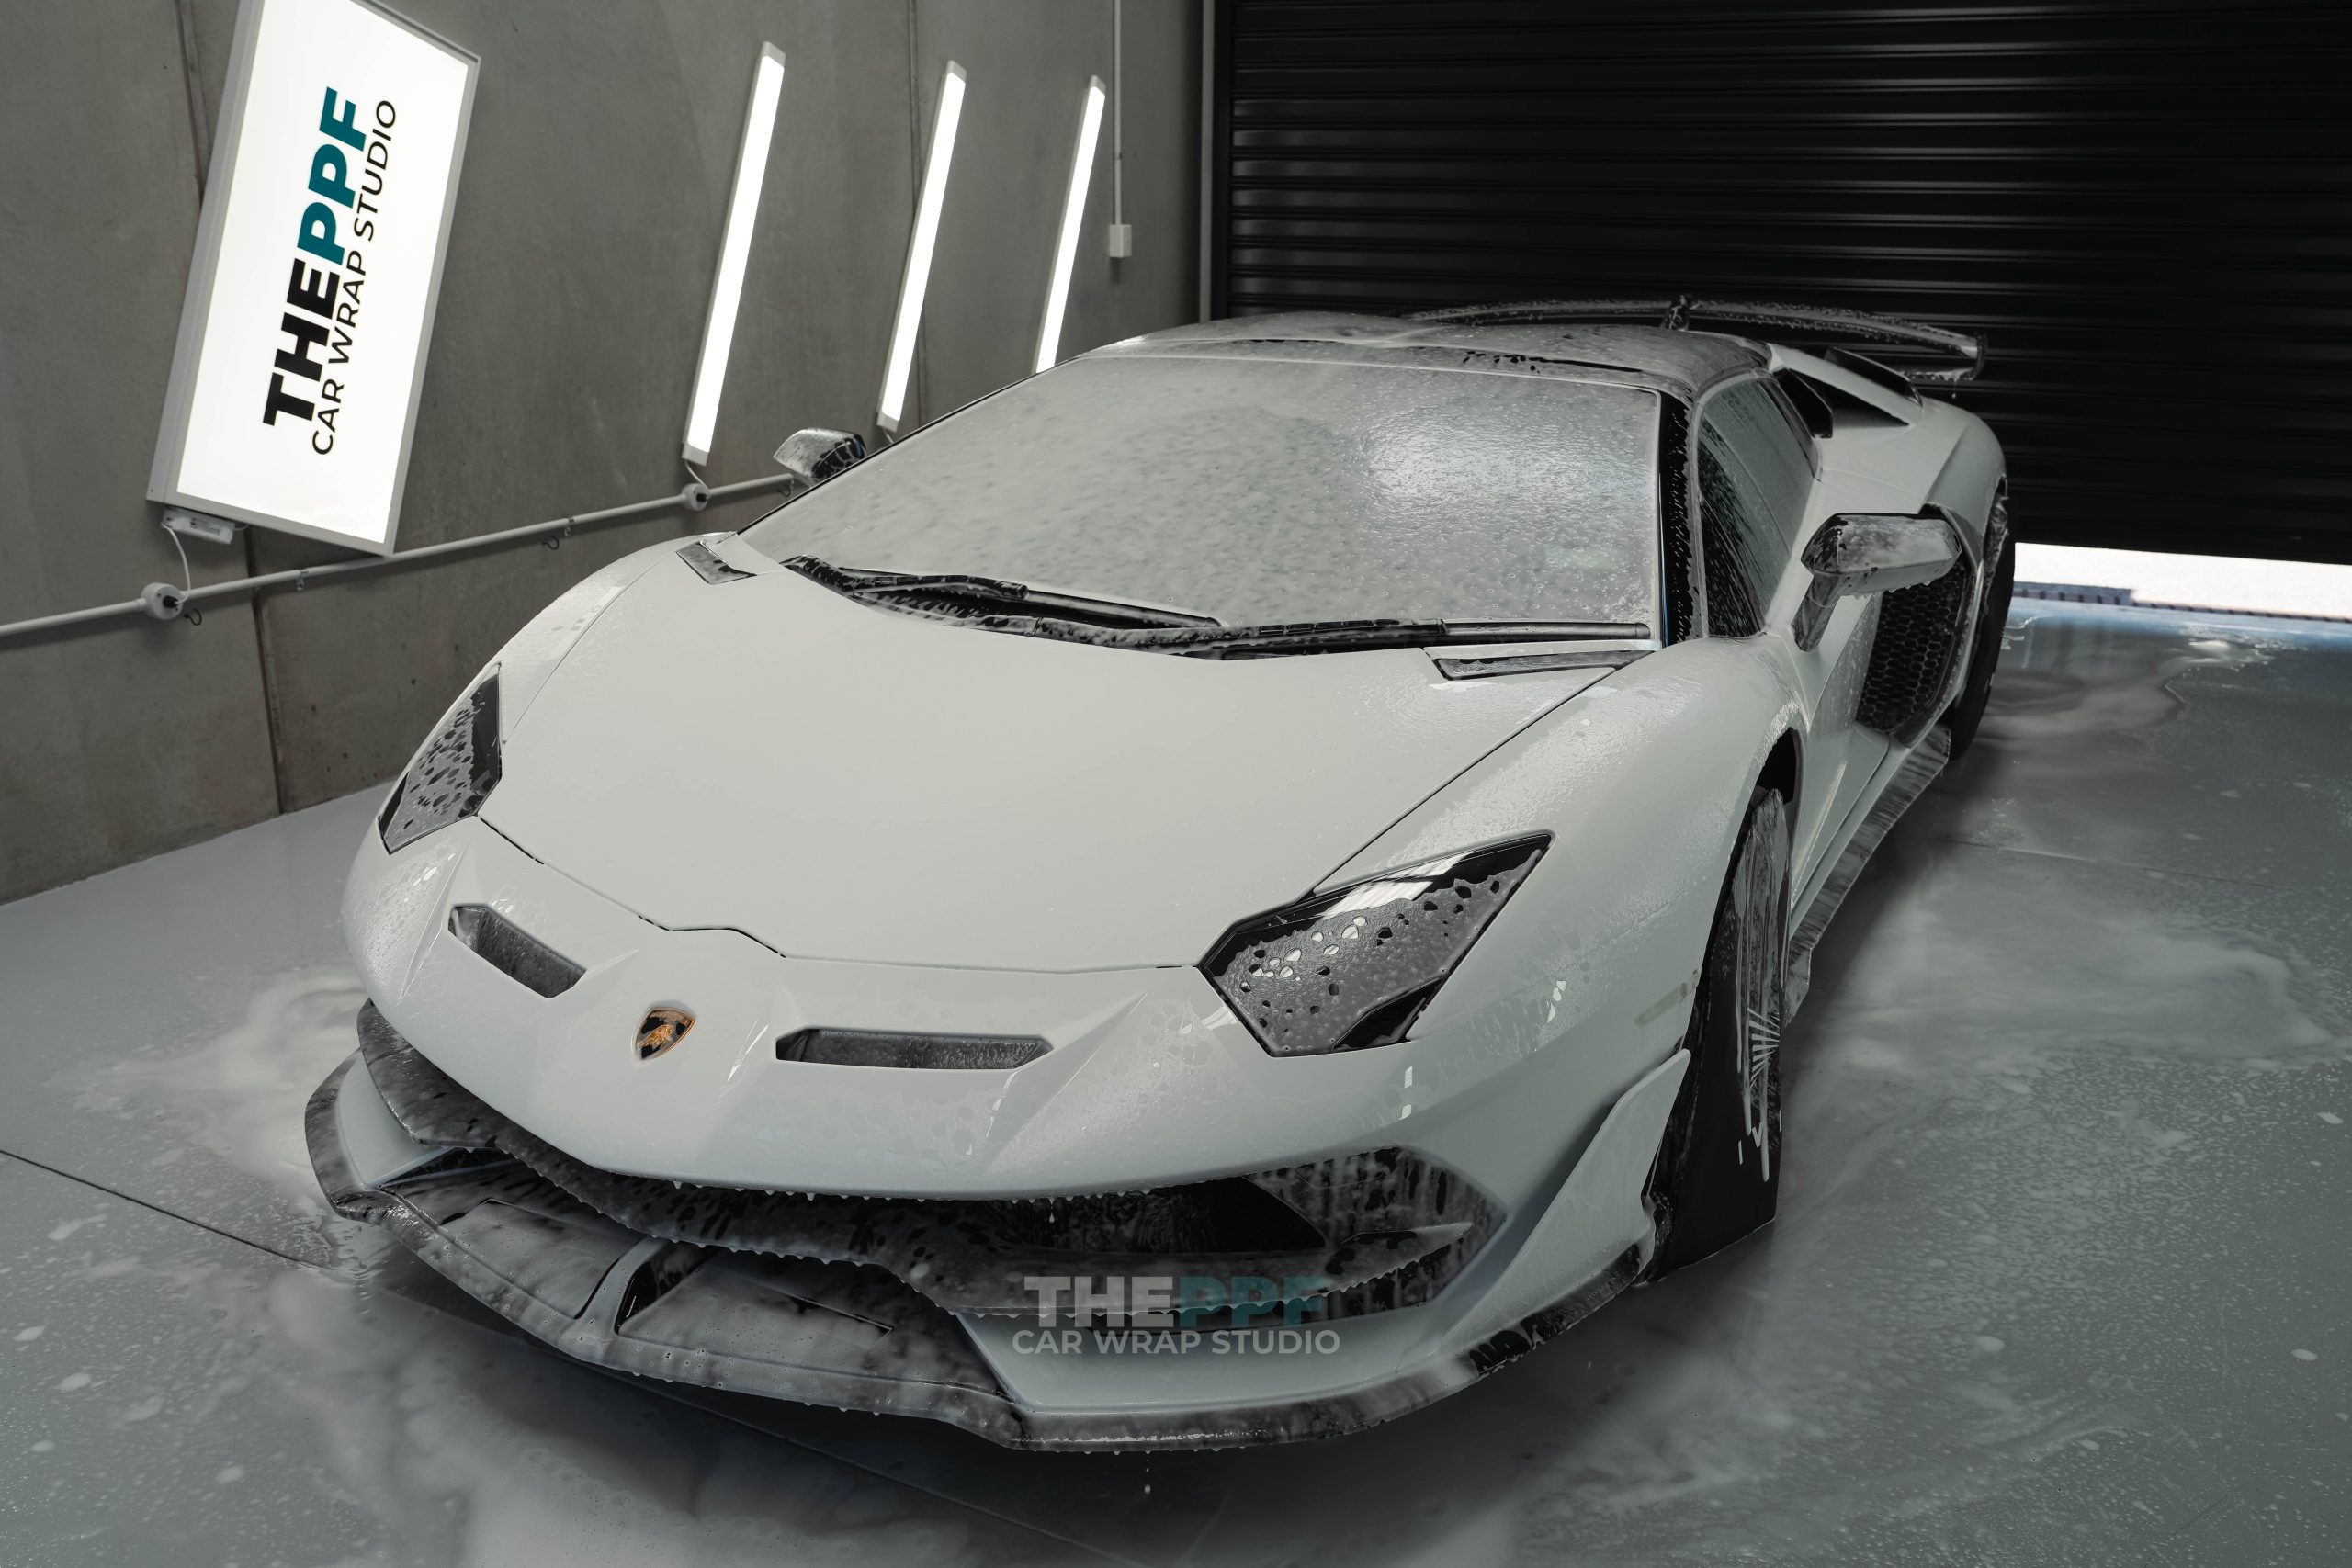 the ppf lamborghini aventador svj super car paint protection film wrapping auckland new zealand